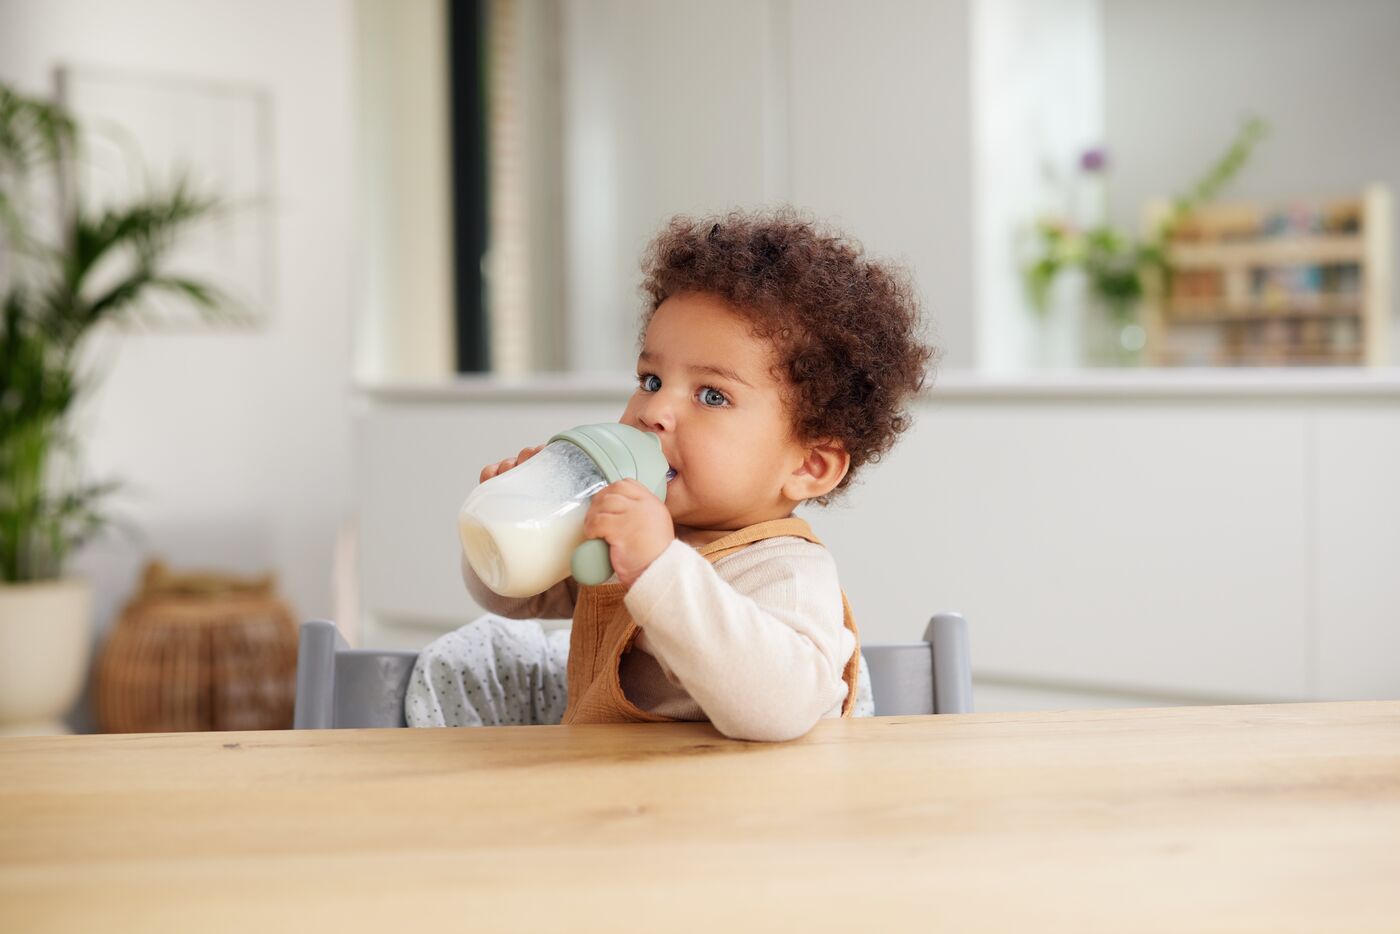 Child with yellow overalls drinking from a sippy cup